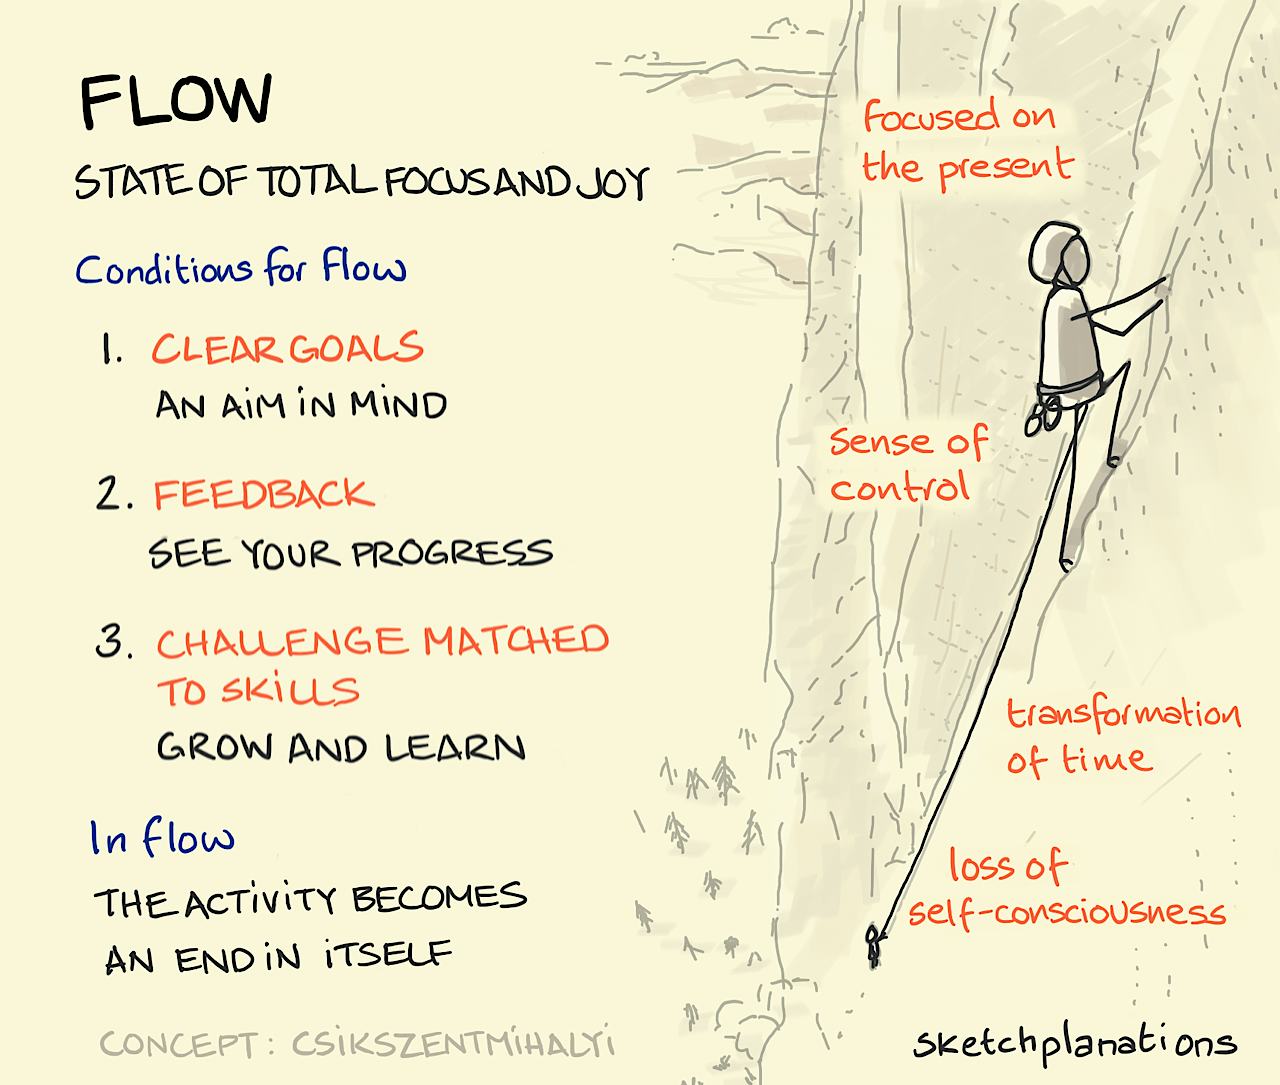 Flow from Mihalyi Csikszentmihalyi - a state of total focus and joy: two climbers illustrate flow through clear goals, feedback and challenge matched to skills